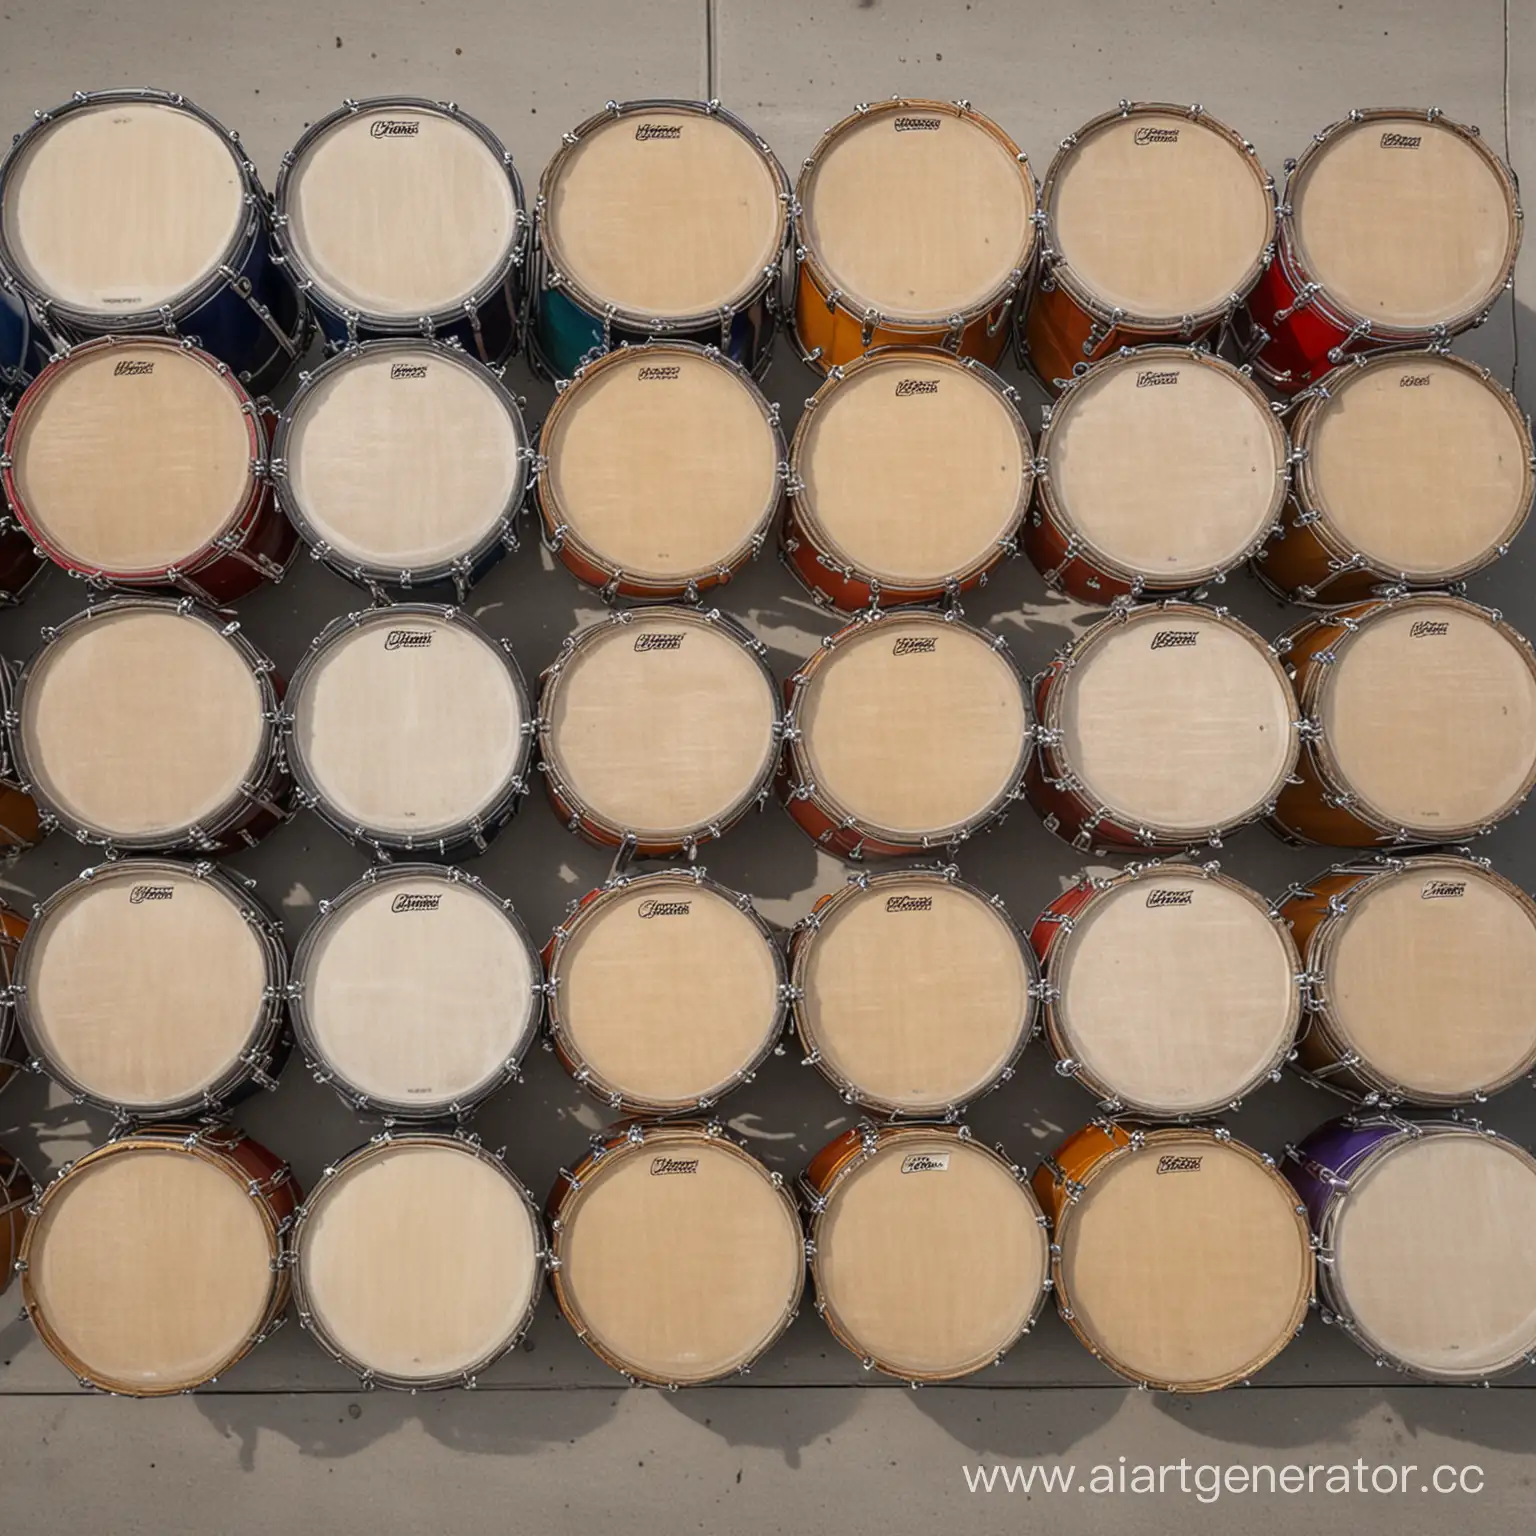 Vibrant-Array-of-Colorful-Drums-for-Musical-Enthusiasts